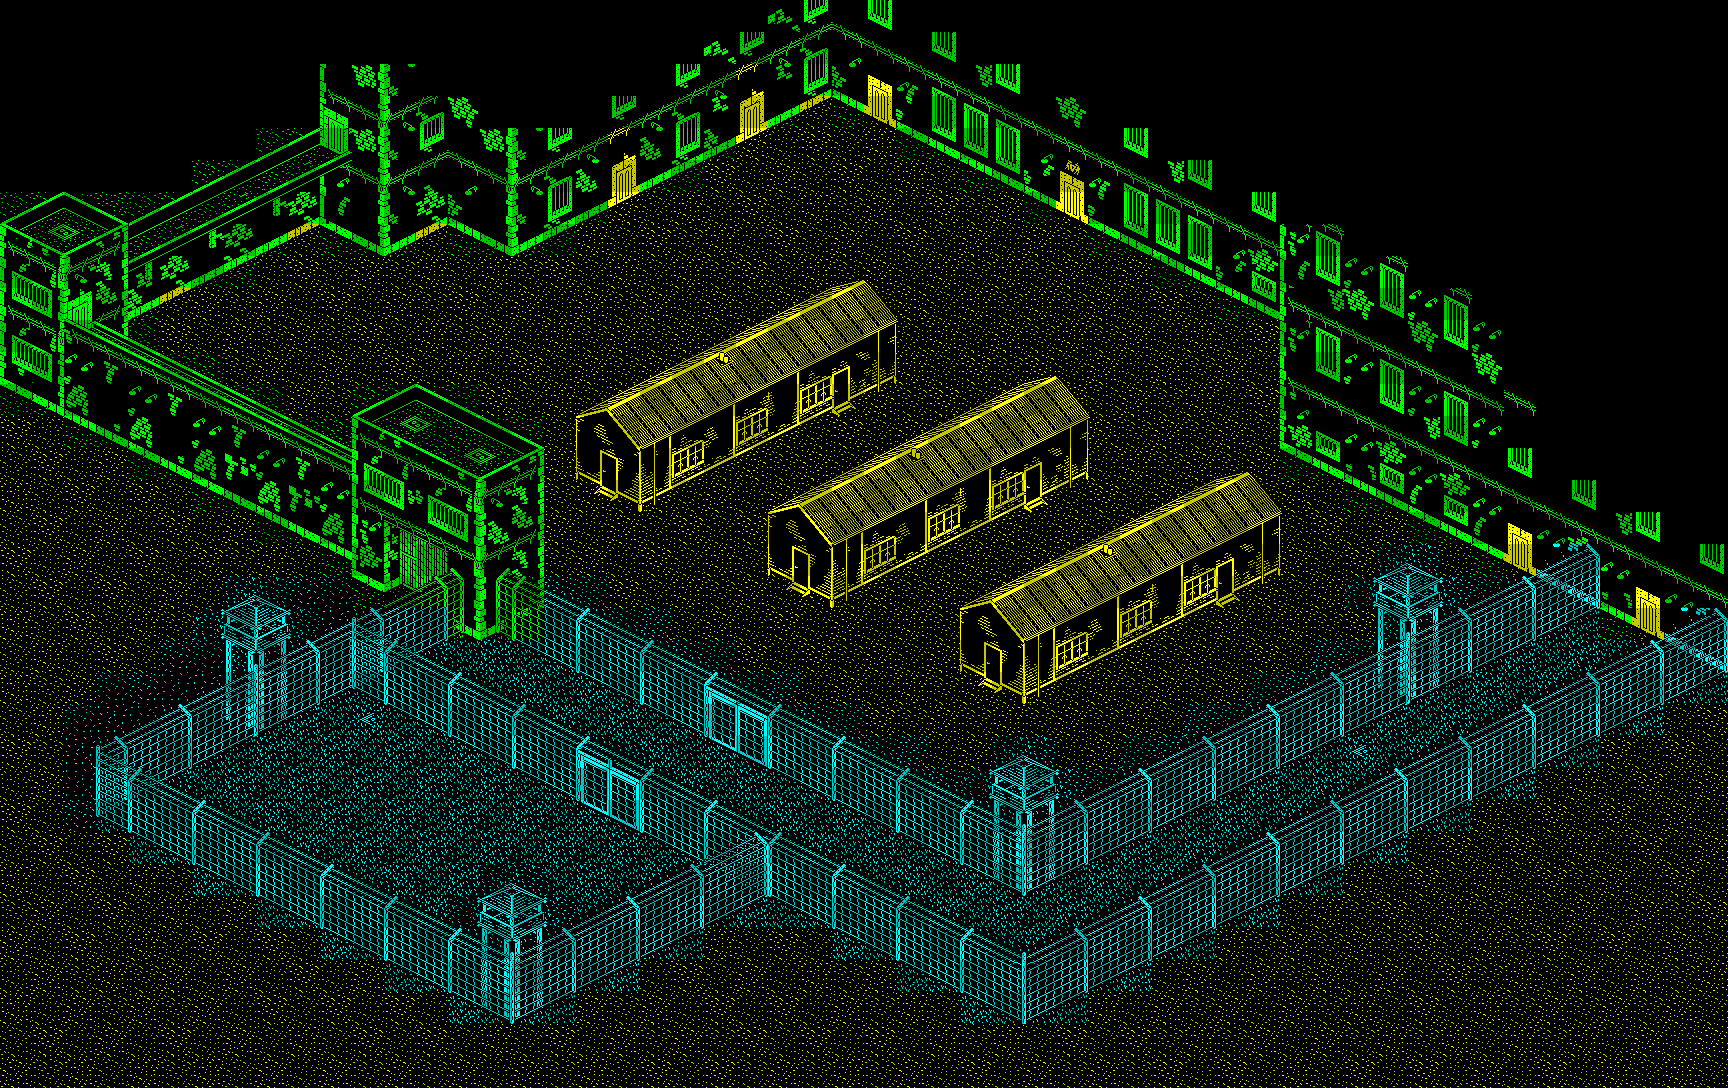 Game's exterior map backdrop with super-tiles overlaid